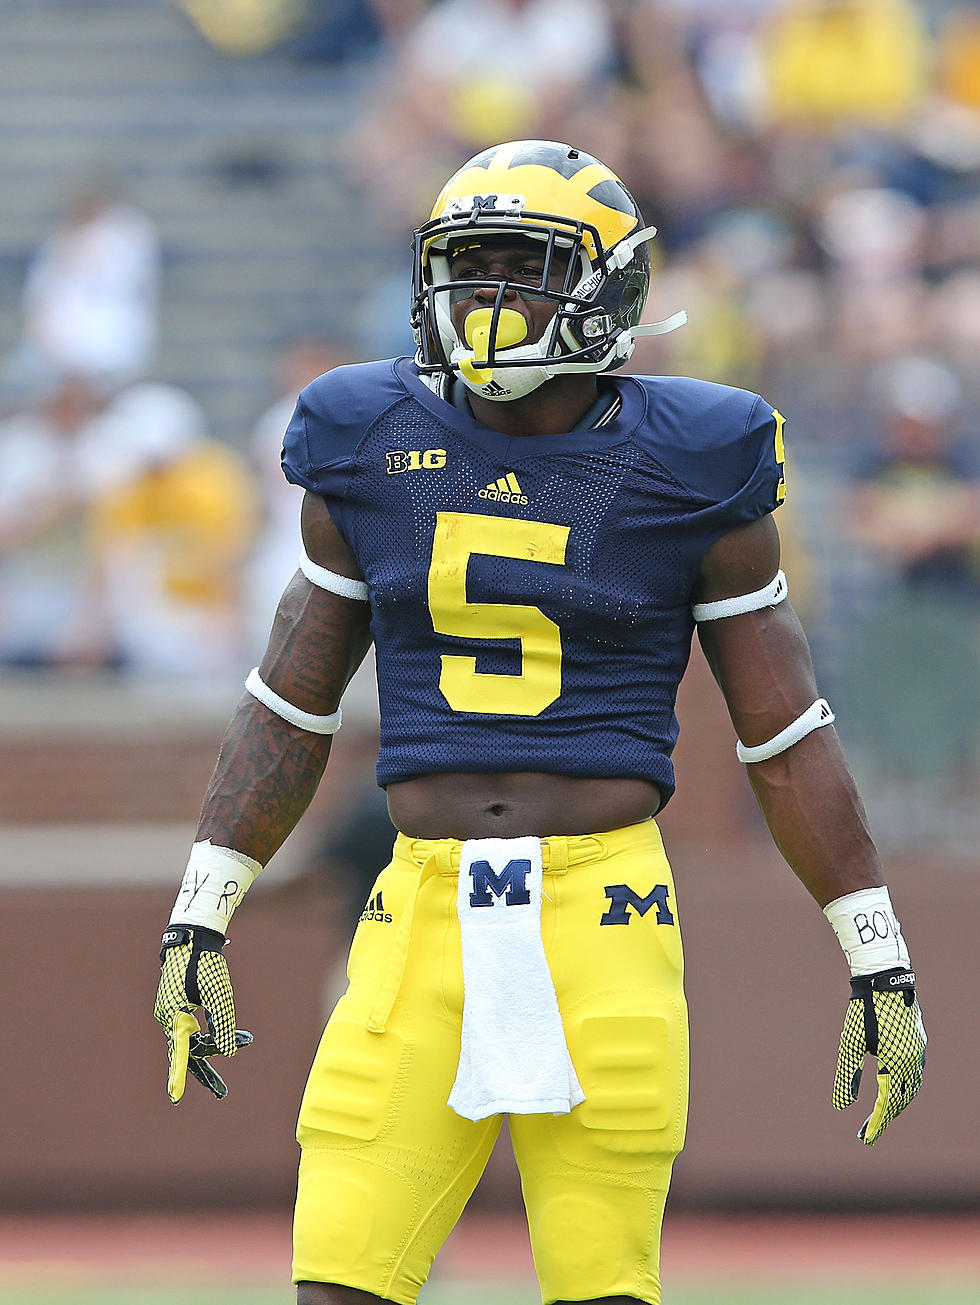 Michigan DB Jabrill Peppers Unhappy with the NCAA